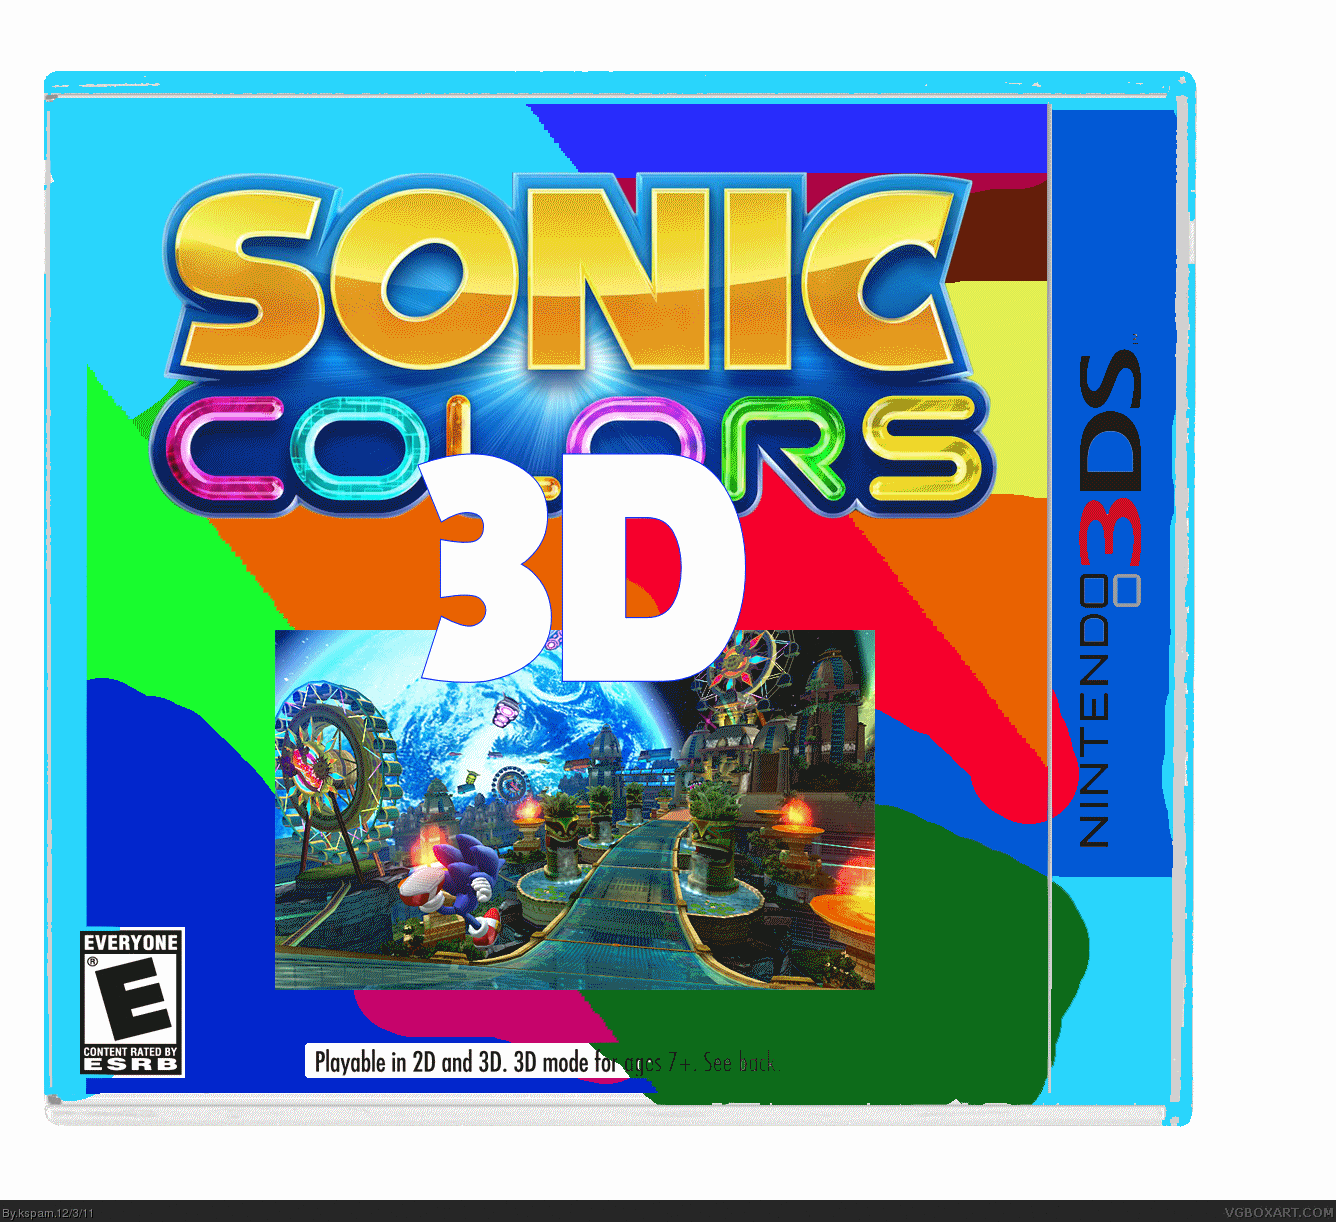 sonic colors 3D box cover